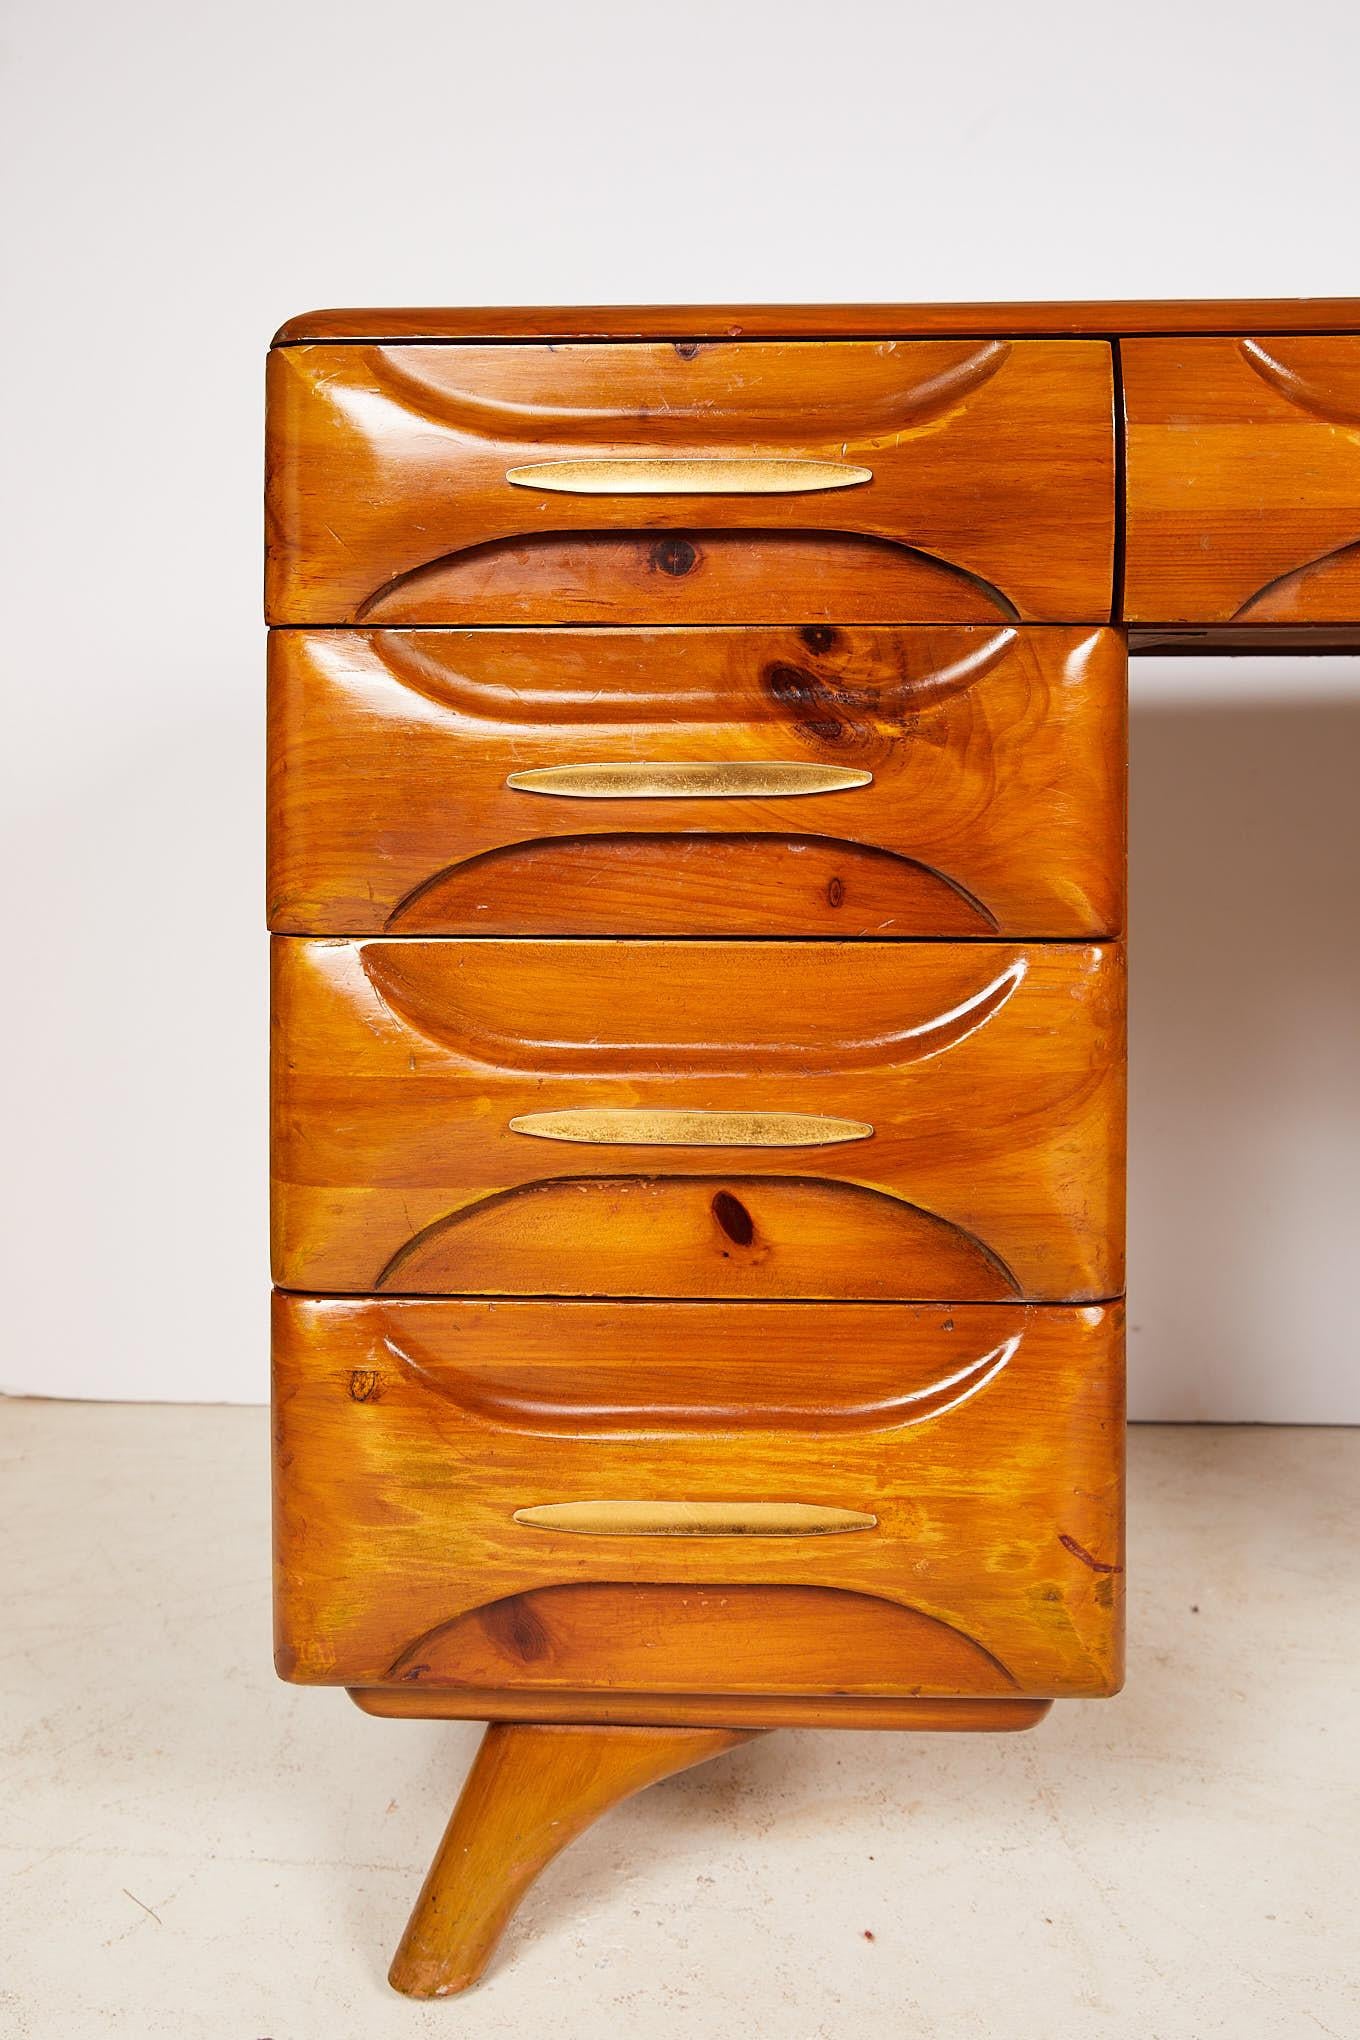 Midcentury Sculptured Pine Desk by the Franklin Shockey Company 3